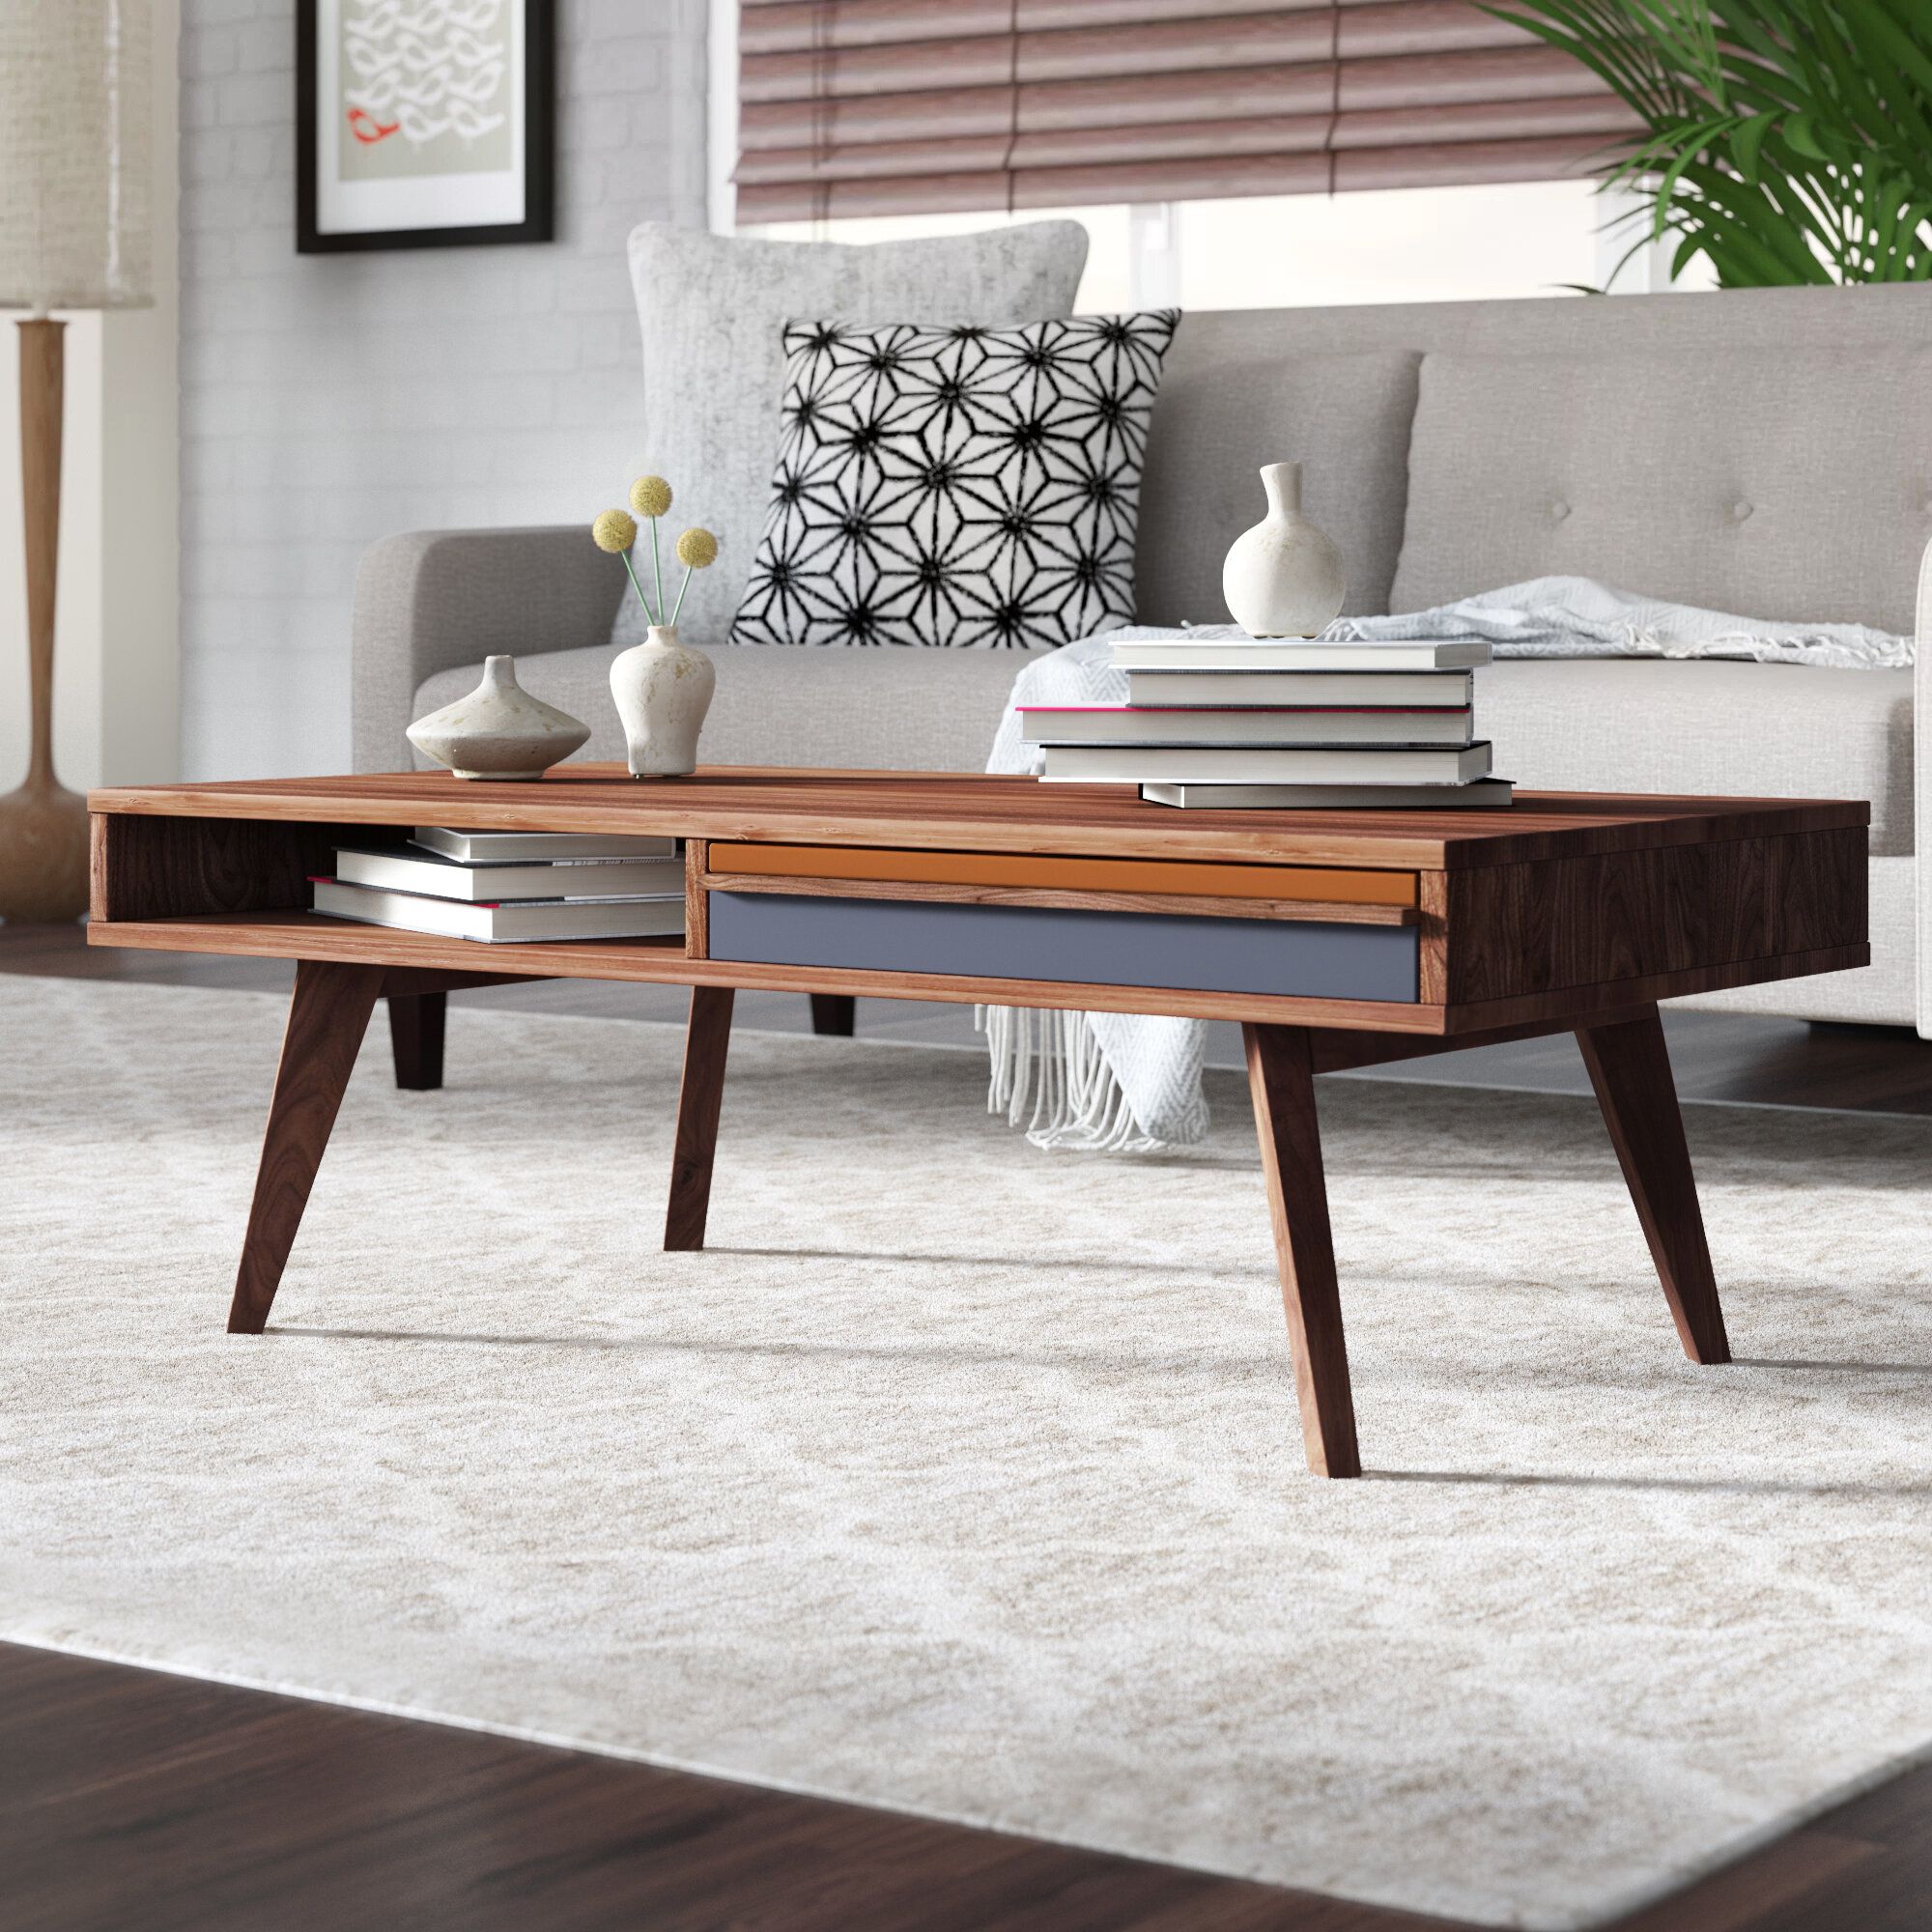 Mid Century Modern Coffee Table – Ideas On Foter Throughout Wooden Mid Century Coffee Tables (View 11 of 20)